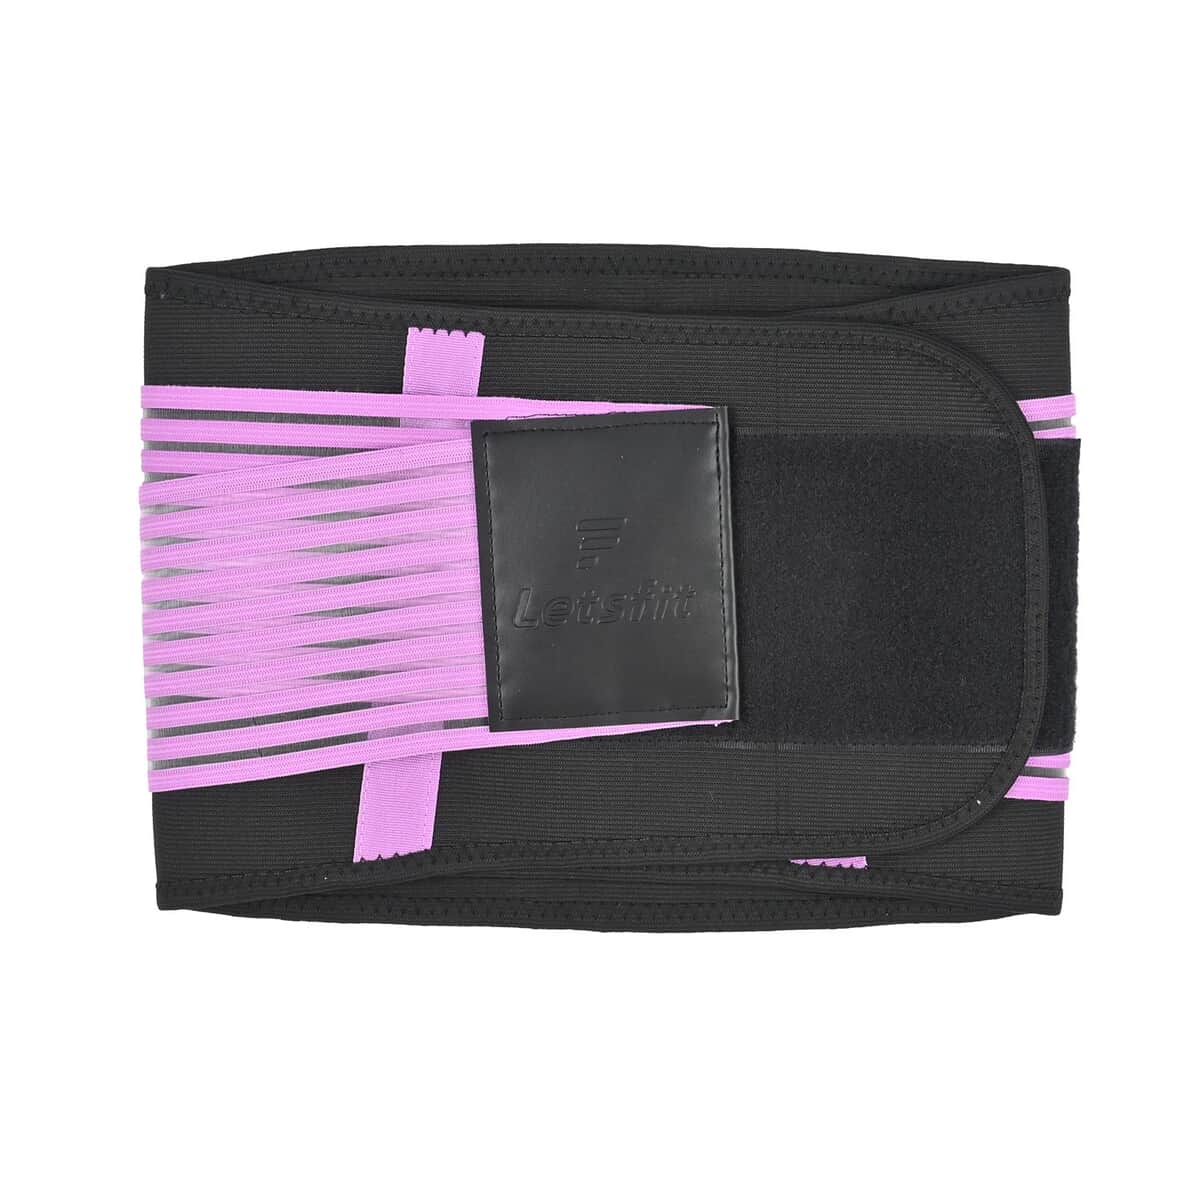 Letsfit Purple Waist Trainer Lumber Support Belt with Measuring Tape - M image number 5